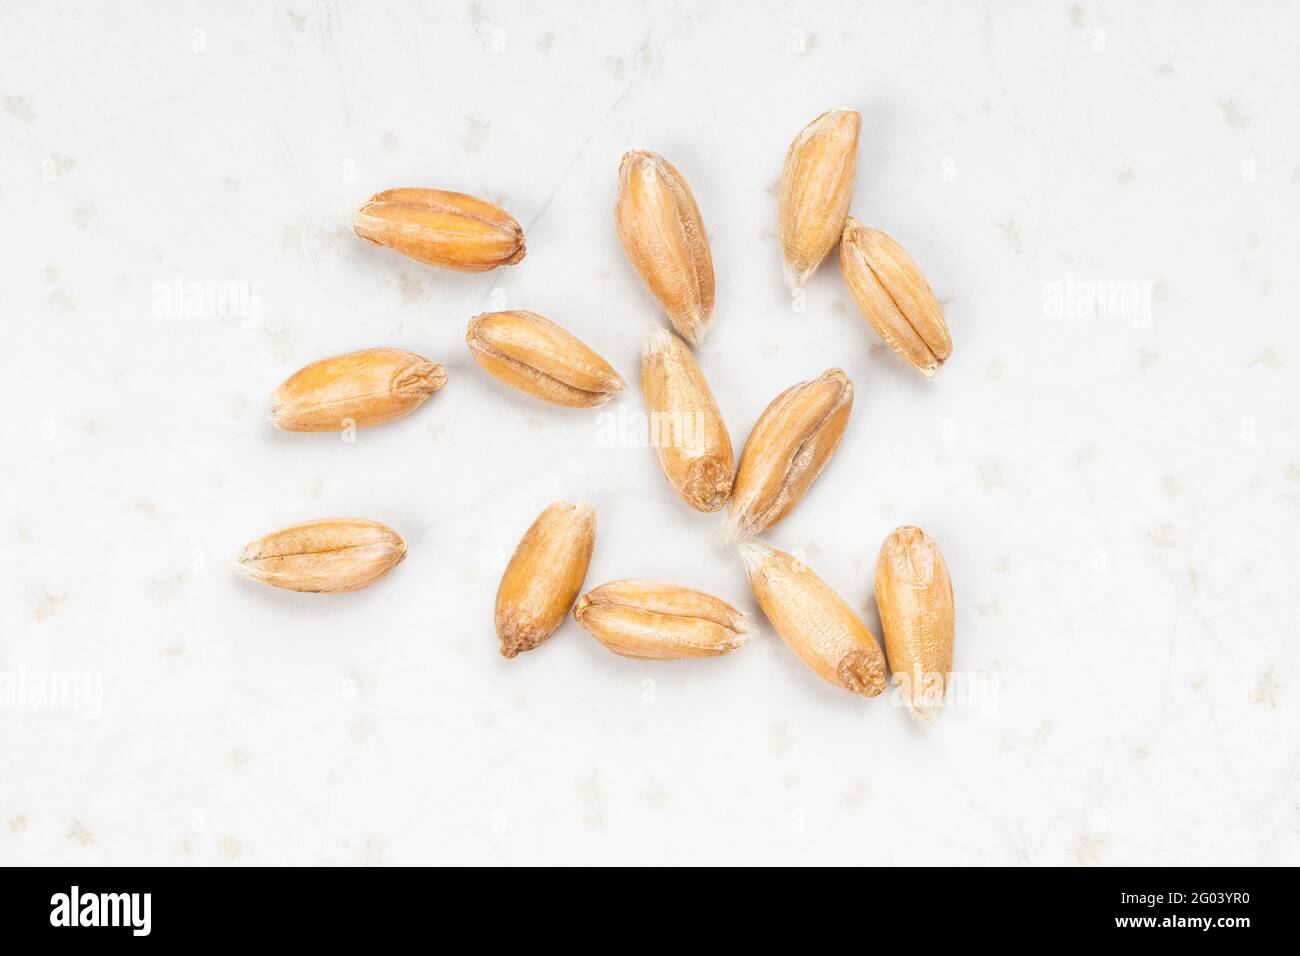 several spelt wheat grains close up on gray ceramic plate Stock Photo